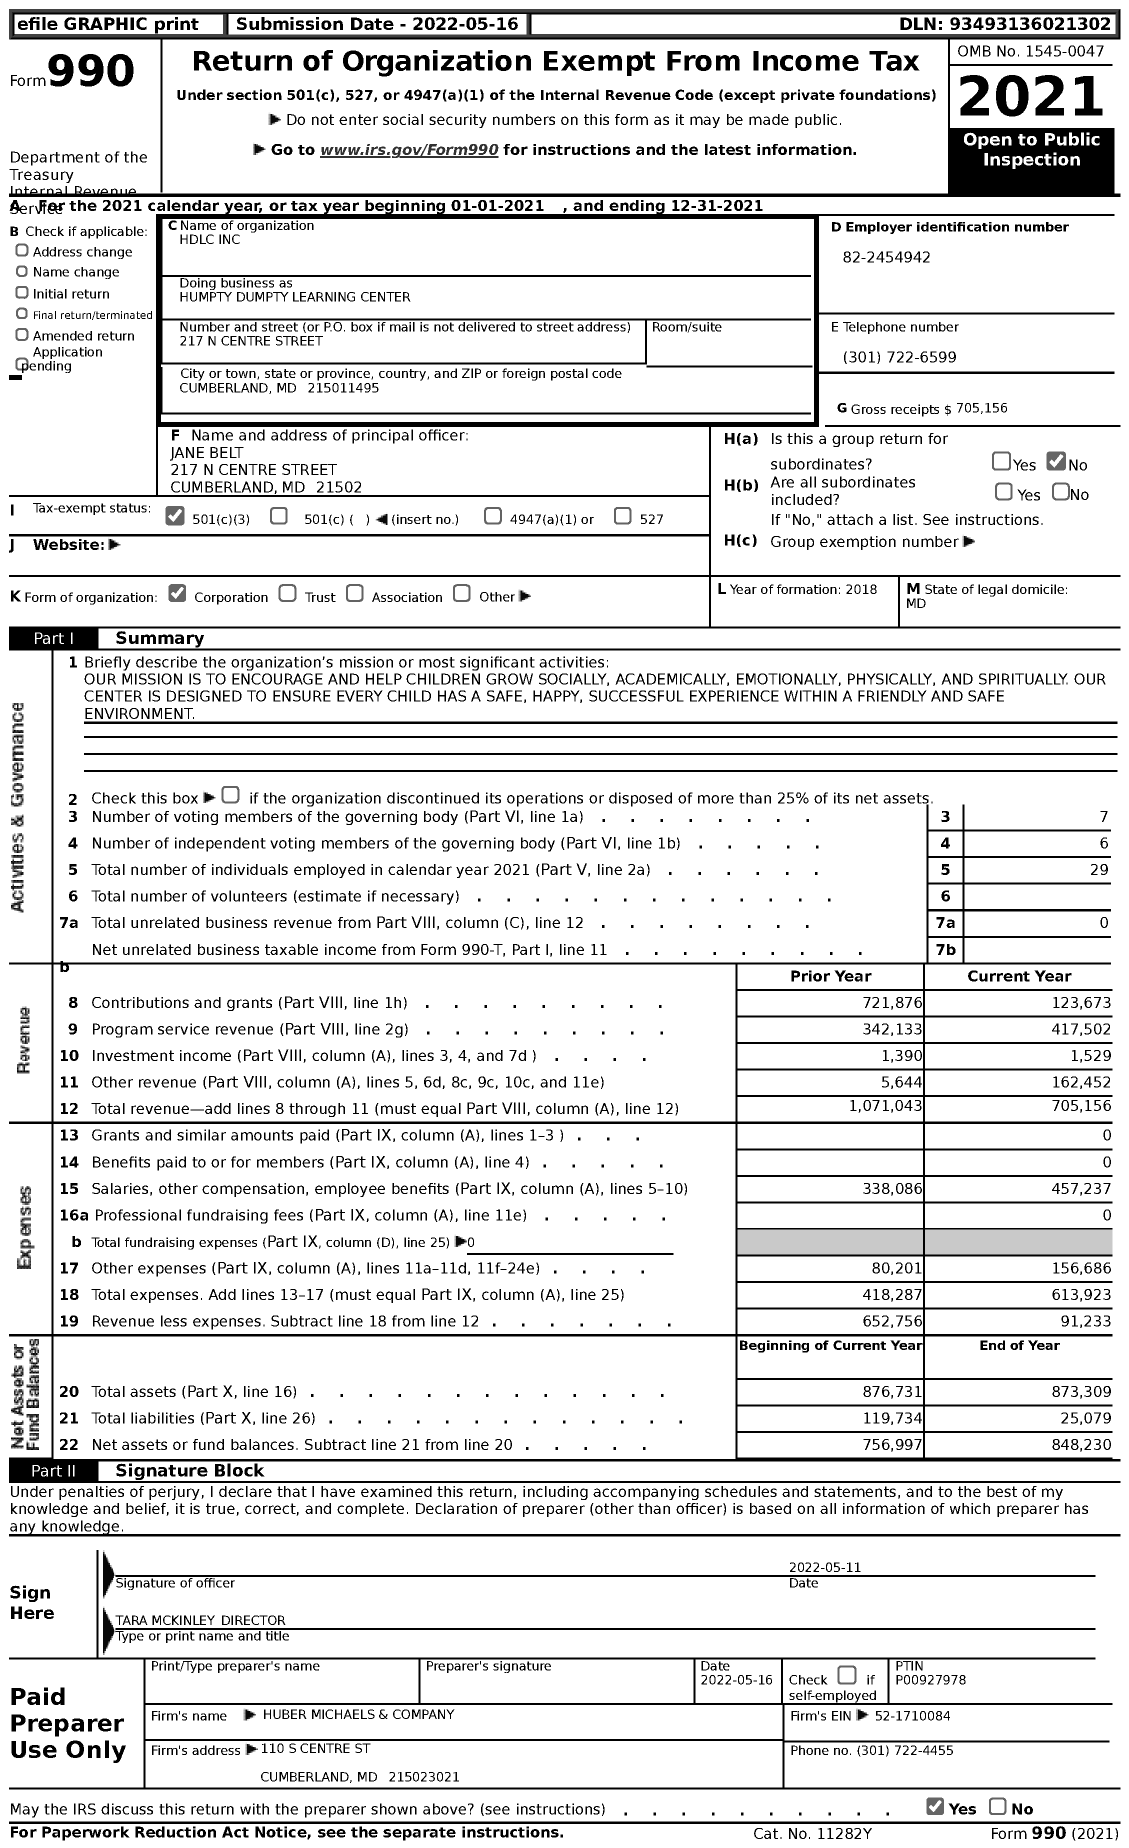 Image of first page of 2021 Form 990 for Humpty Dumpty Learning Center